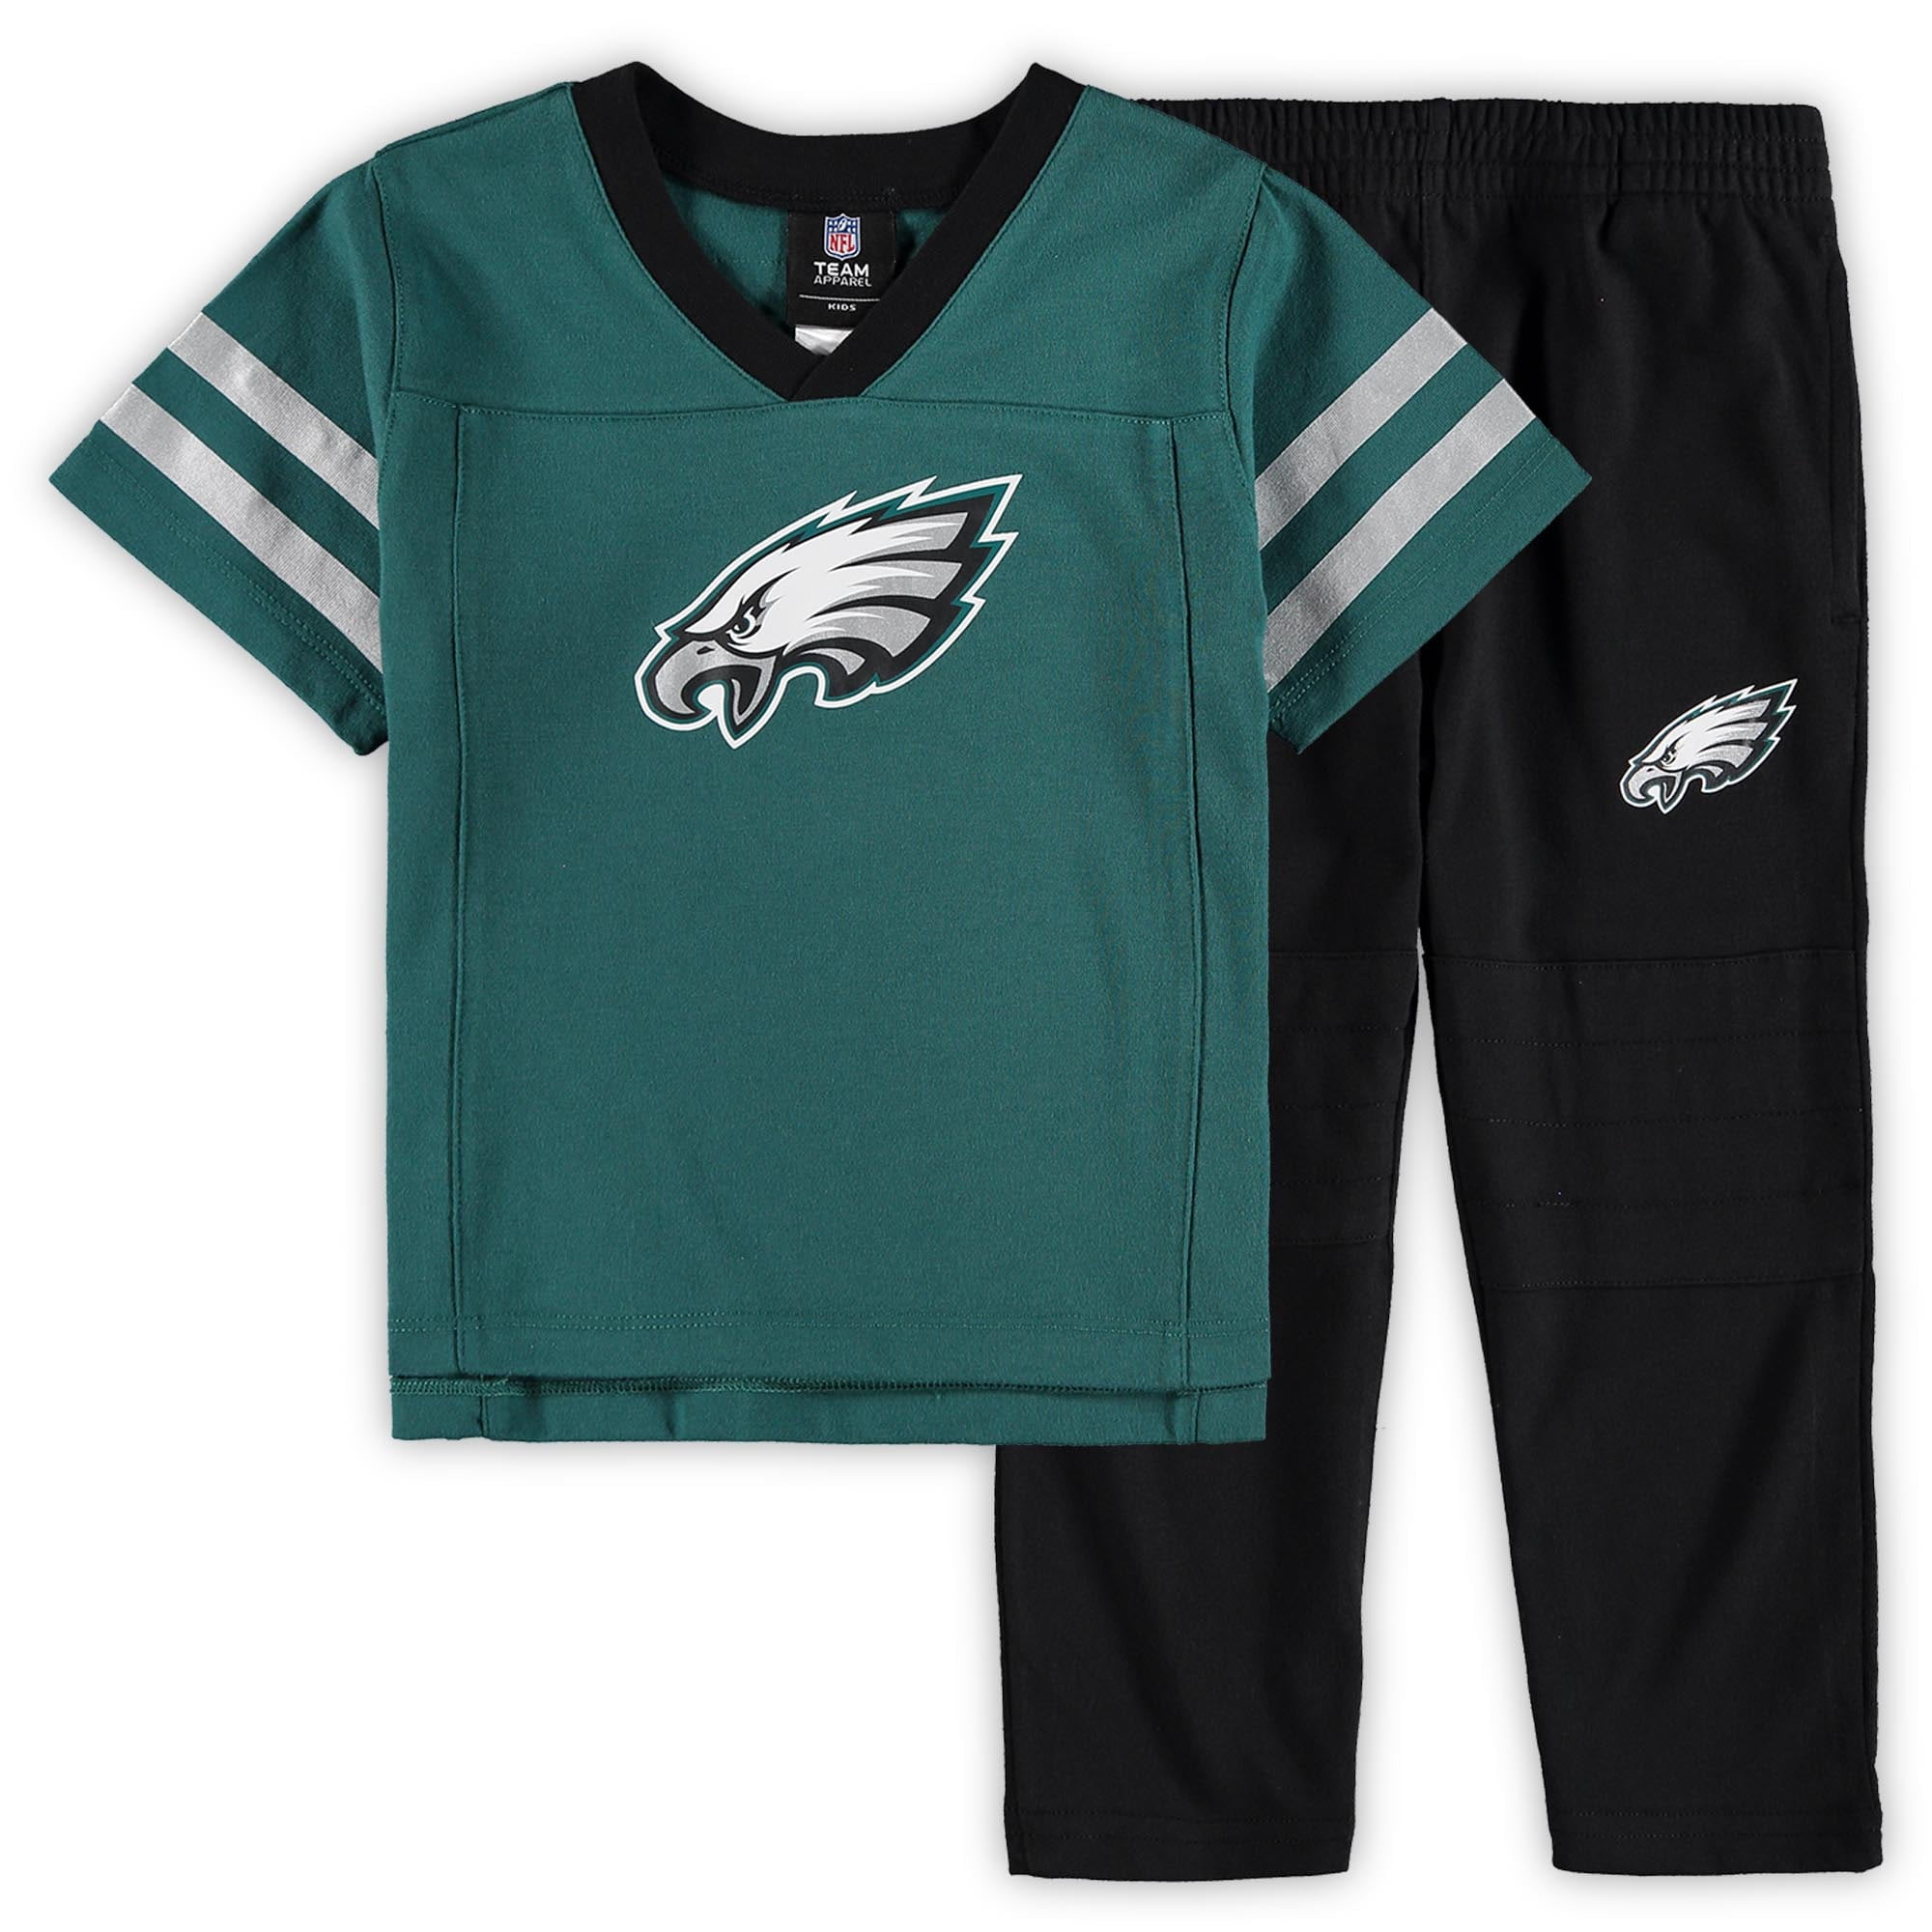 2t eagles jersey